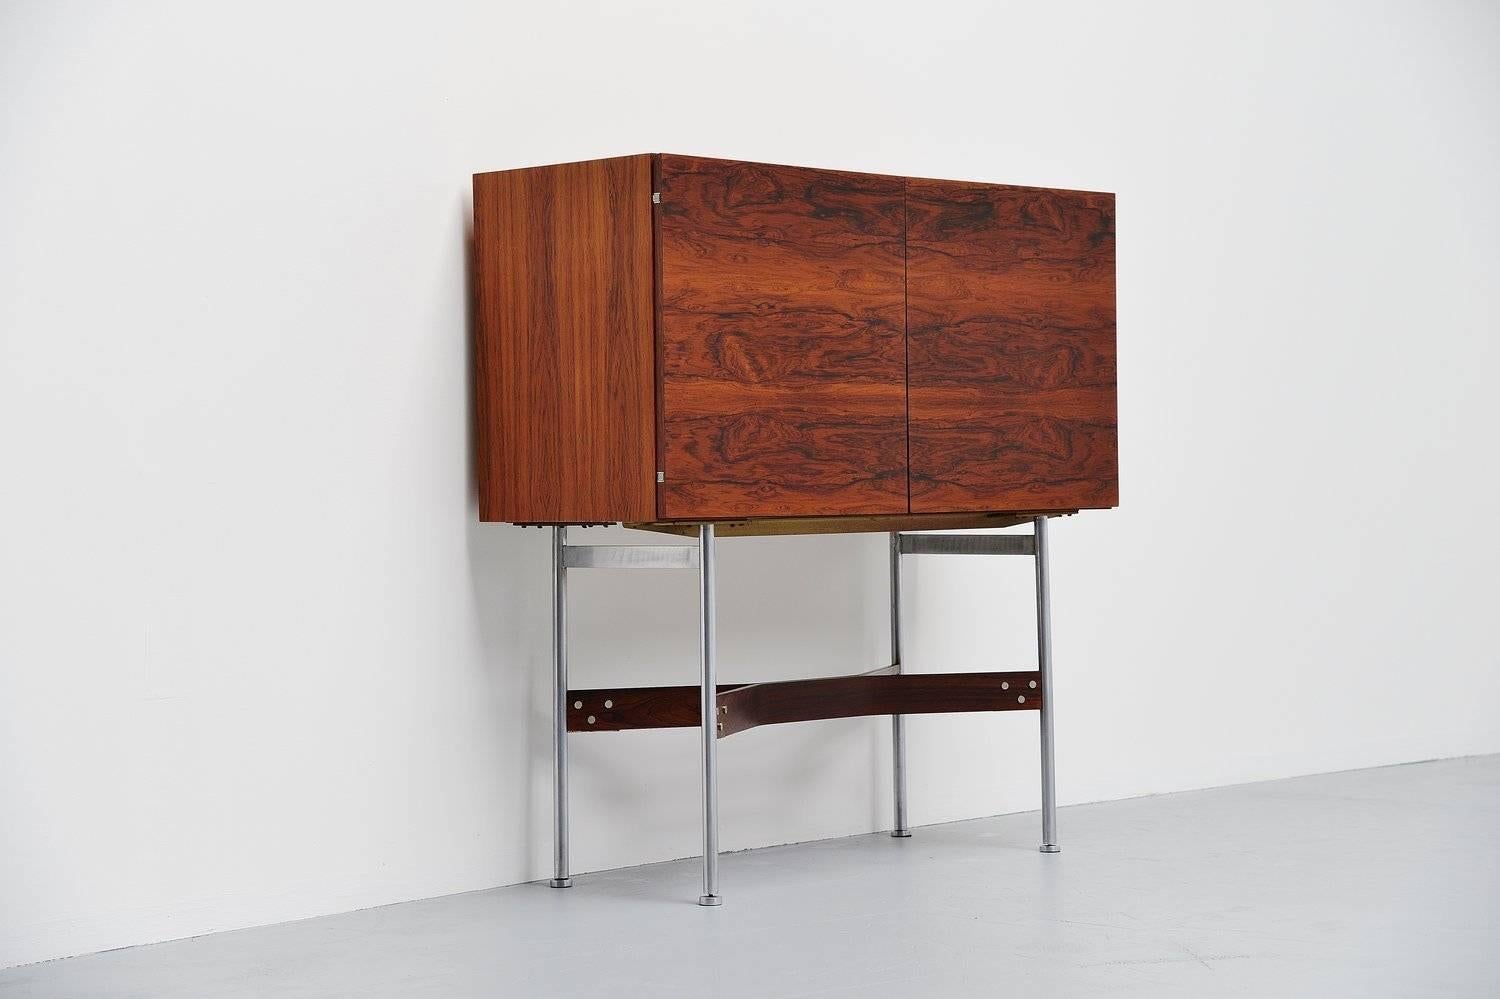 Stunning dry bar cabinet designed by German designer Rudolf Bernd Glatzel for Fristho Franeker, Holland 1956. This amazing shaped cabinet has a fantastic grain to the rosewood veneer. This bar has a brushed steel tubular frame supported by 2